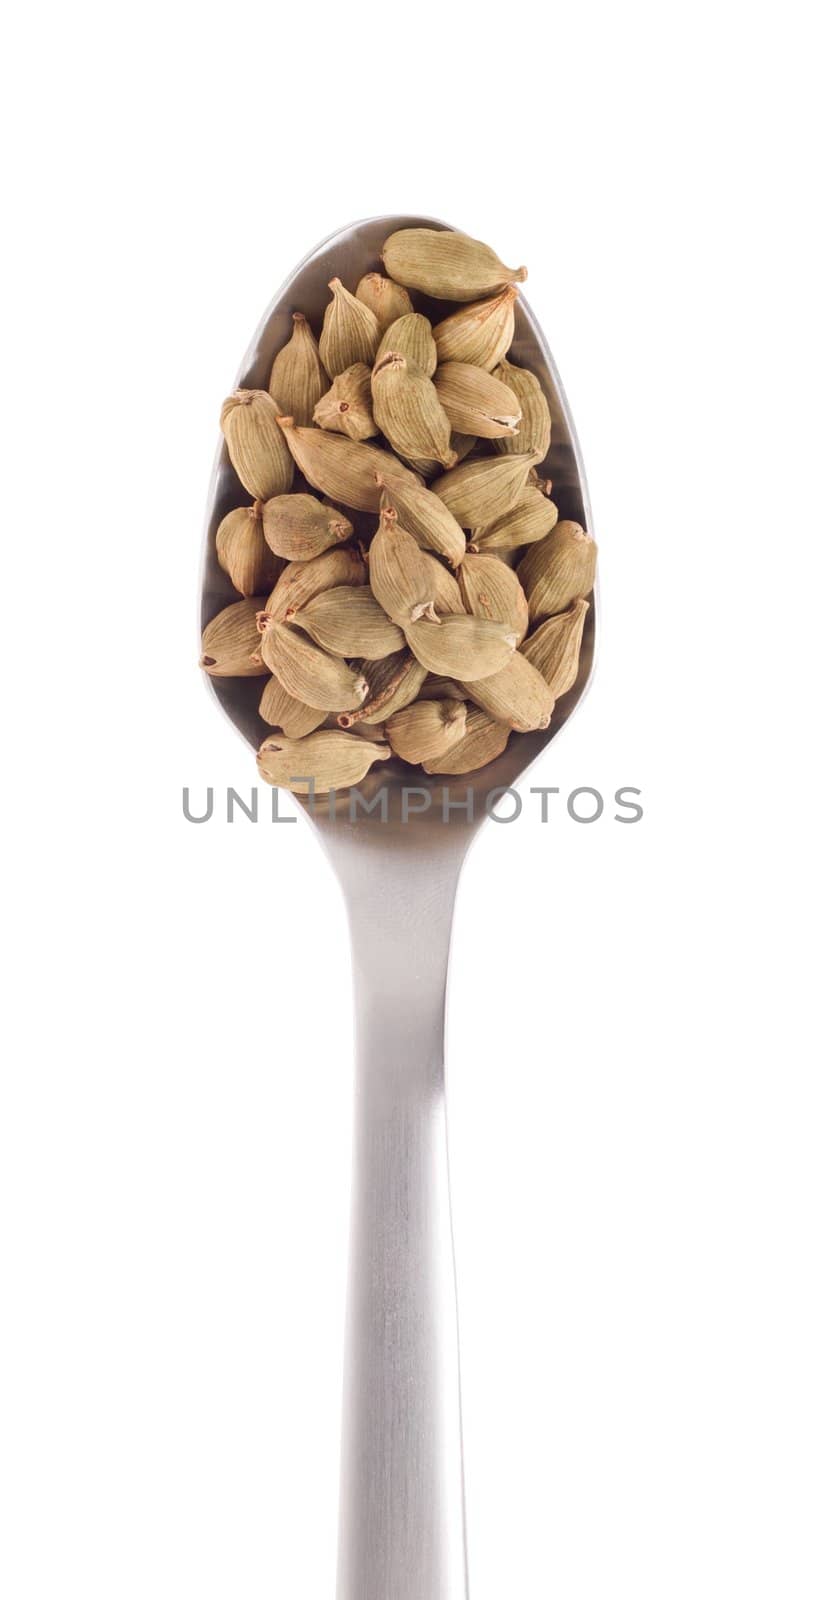 cardamom pods spice on a stainless steel spoon, isolated on white background